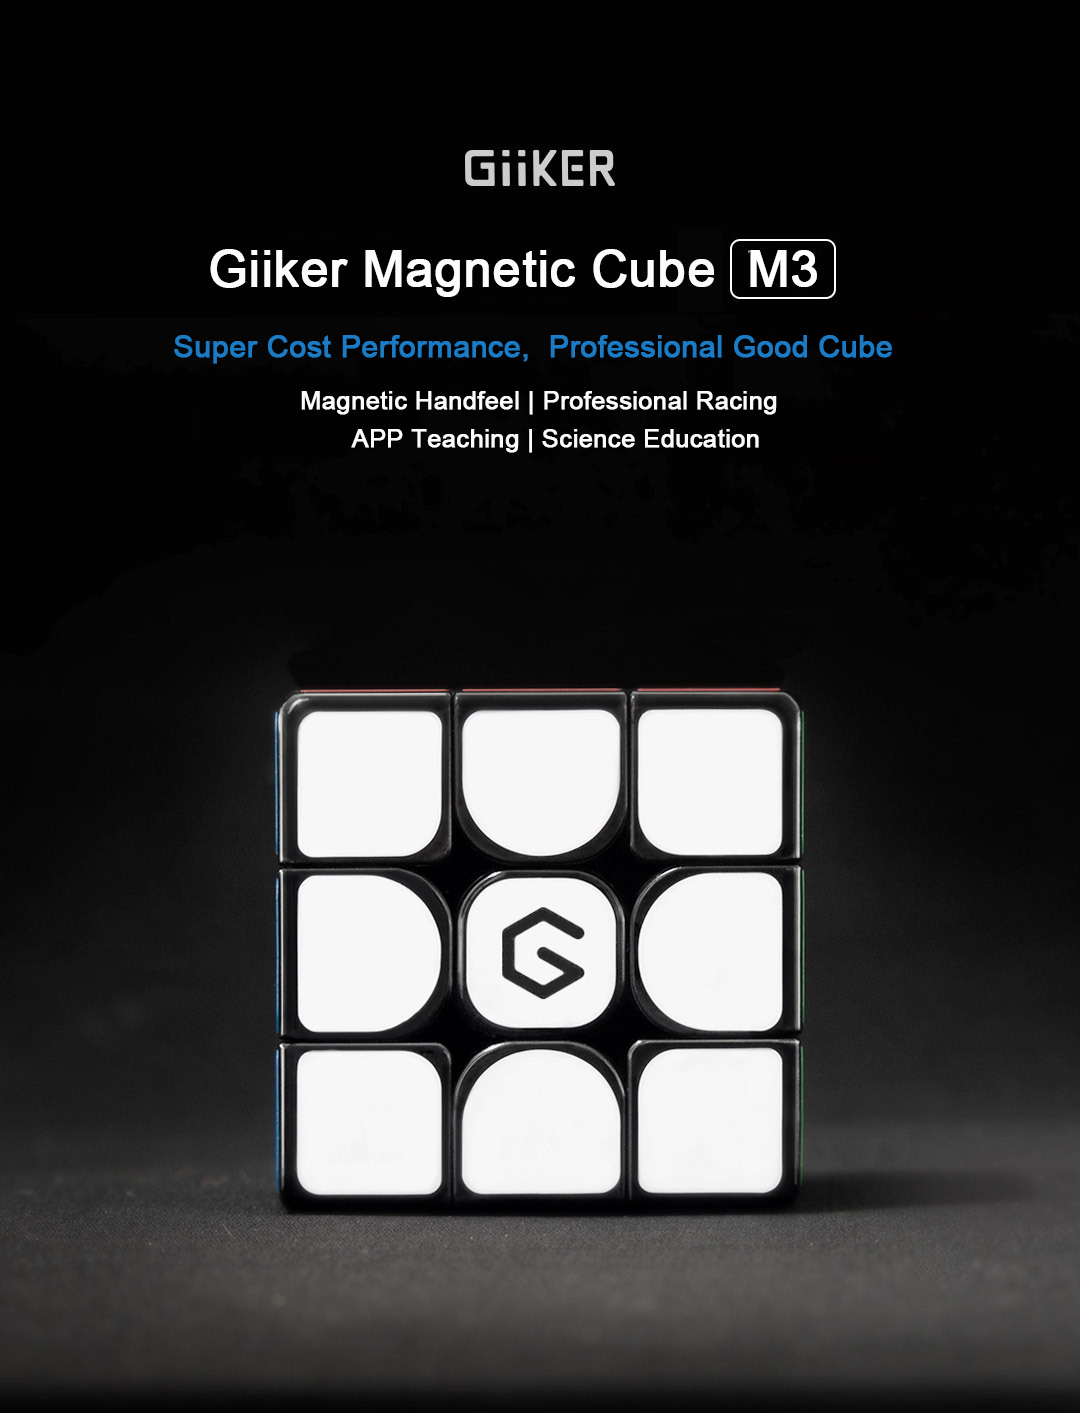 Xiaomi Giiker M3 Magnetic Cube 3x3x3 Vivid Color Square Magic Cube Puzzle Science Education Toy Gift 13